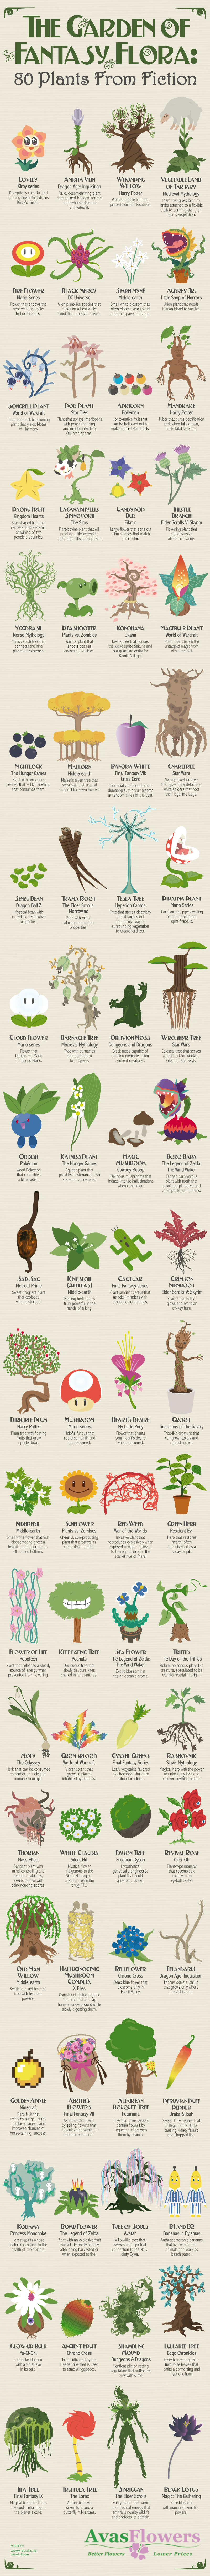 The Garden of Fantasy Flora: 80 Plants From Fiction - Avasflowers.net - Infographic